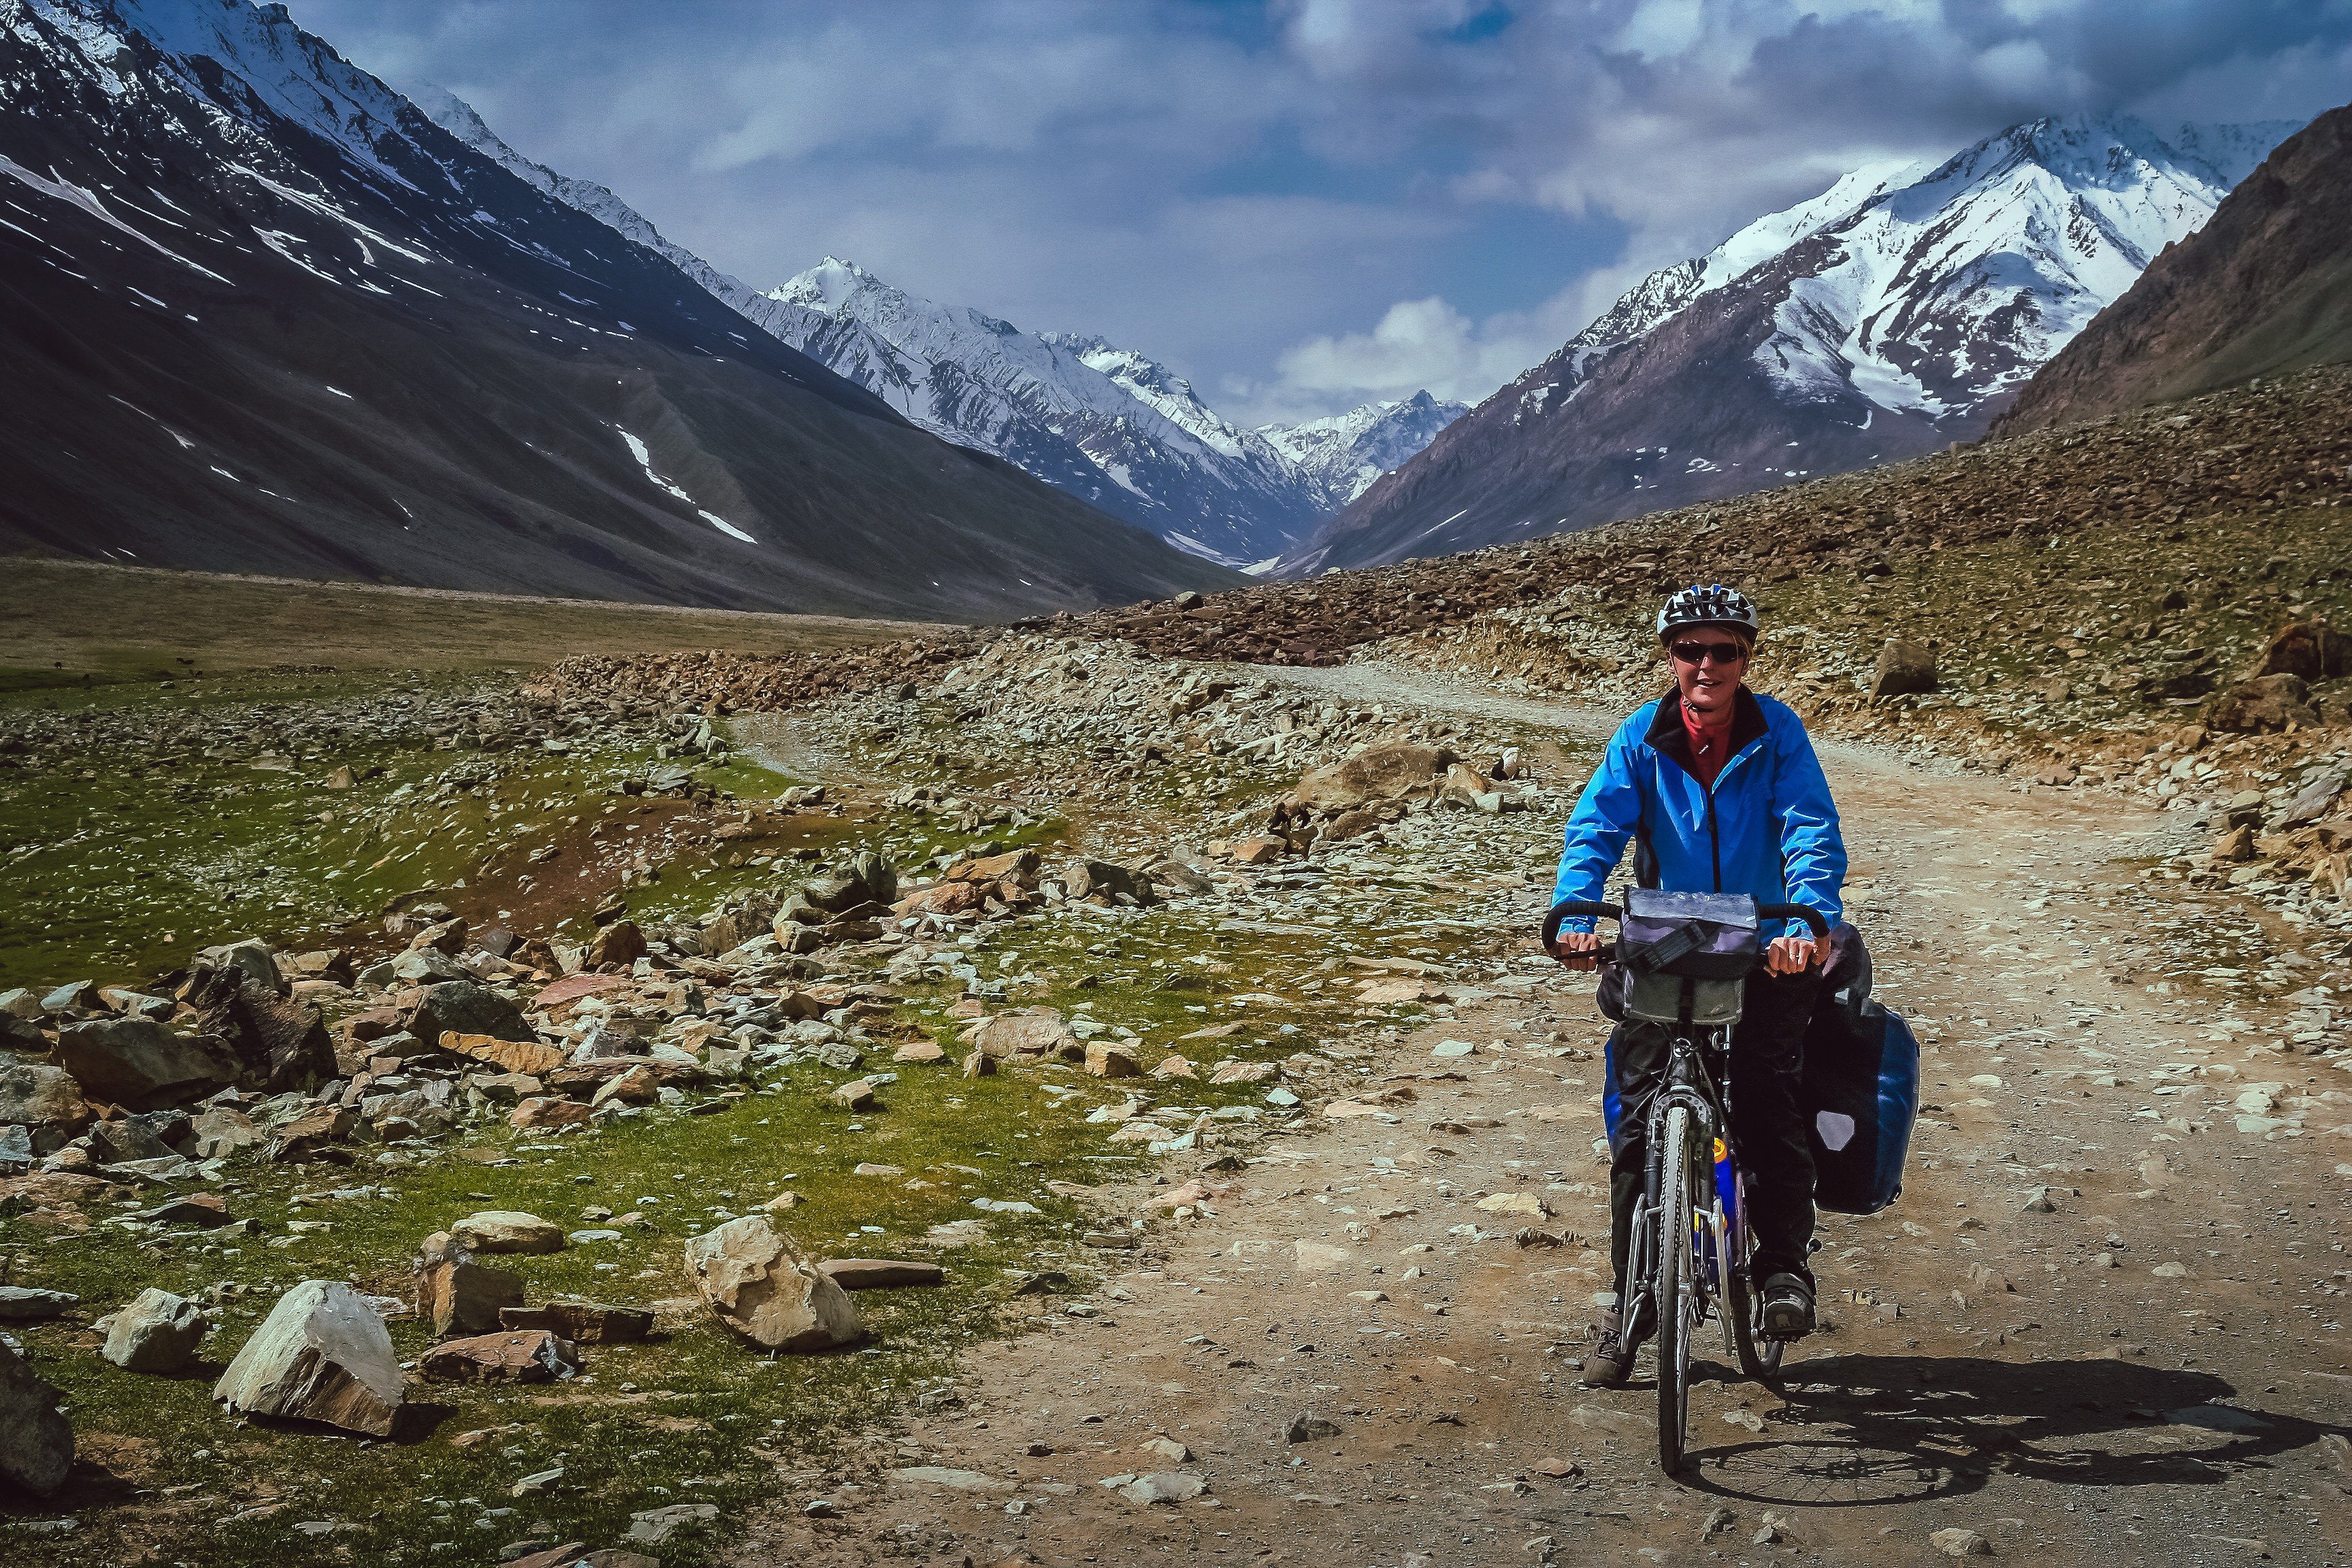 A cyclist makes their way along on a difficult mountain road towards Shandur Pass in northern Pakistan. Photo: Shutterstock Images